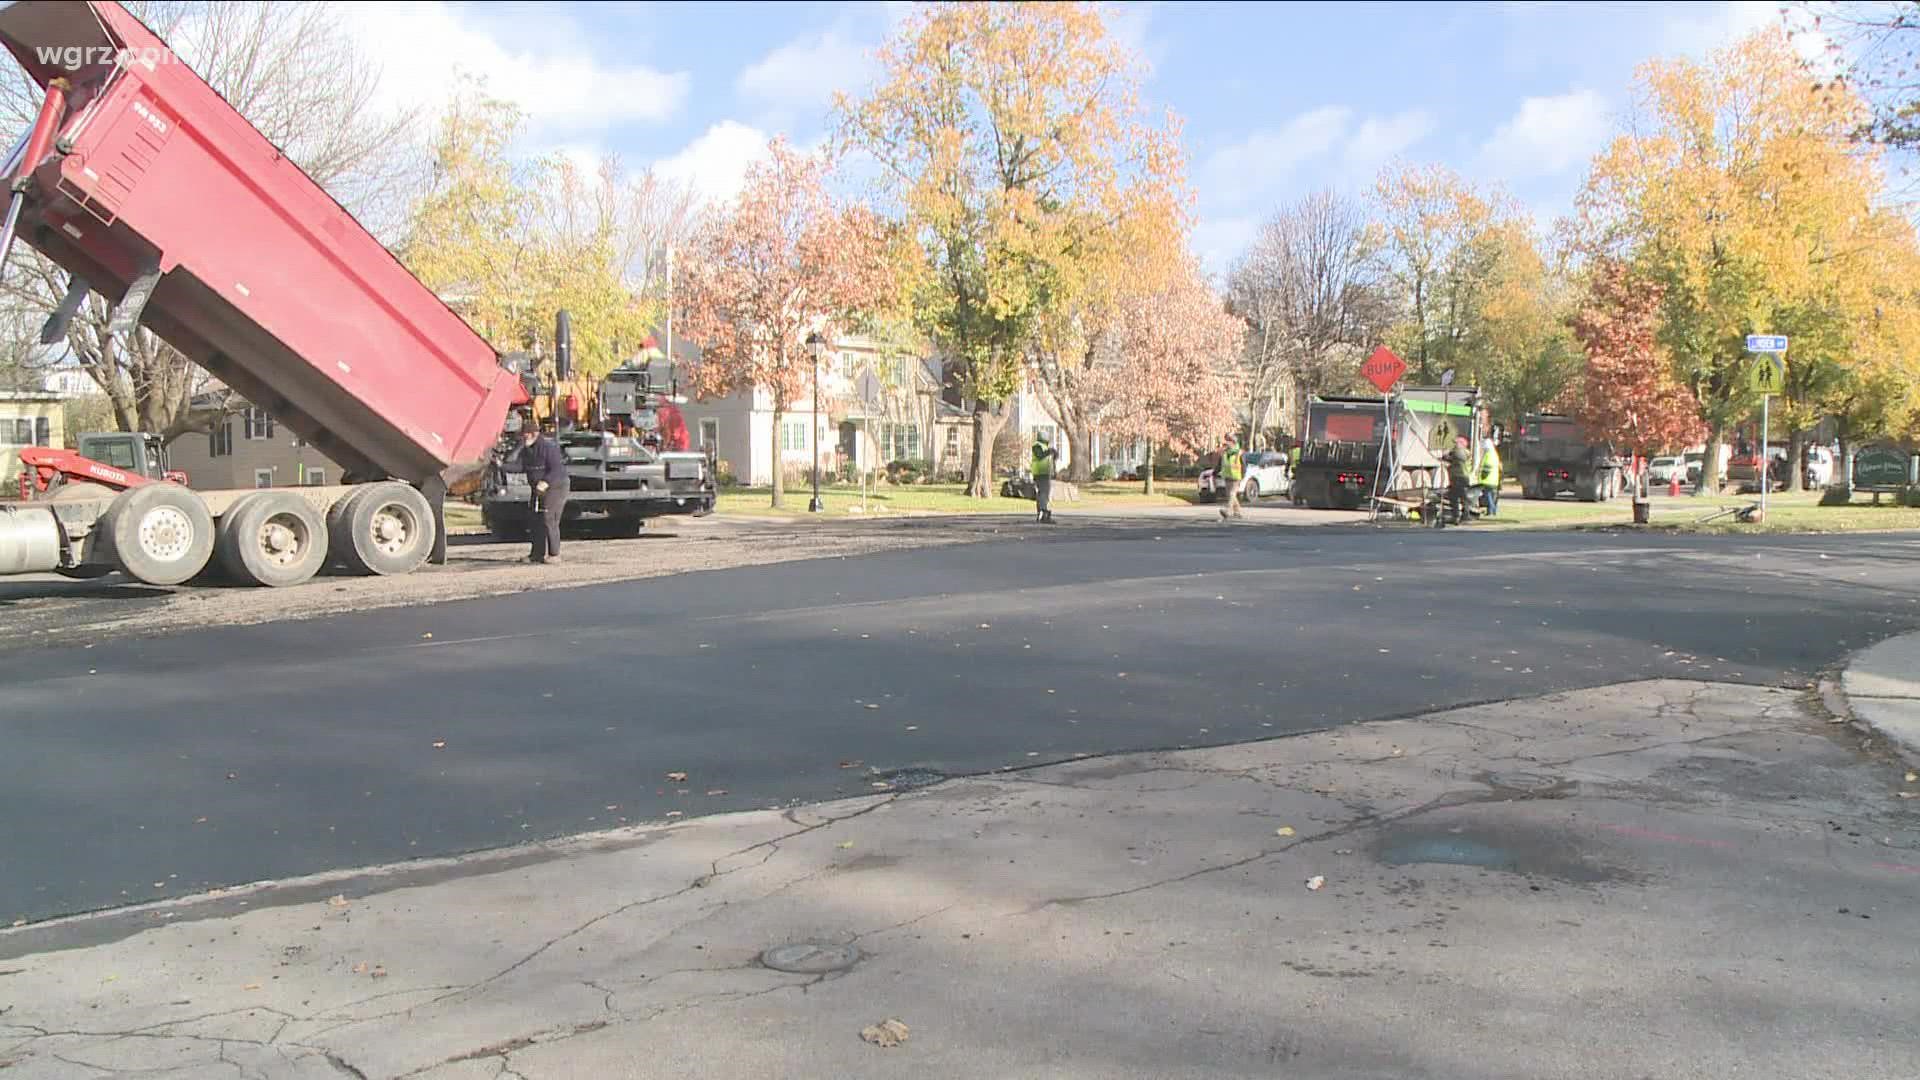 The department of public works says it was able to pave more than 140 streets this year, with 12 million dollars spent on paving residential and main roads.